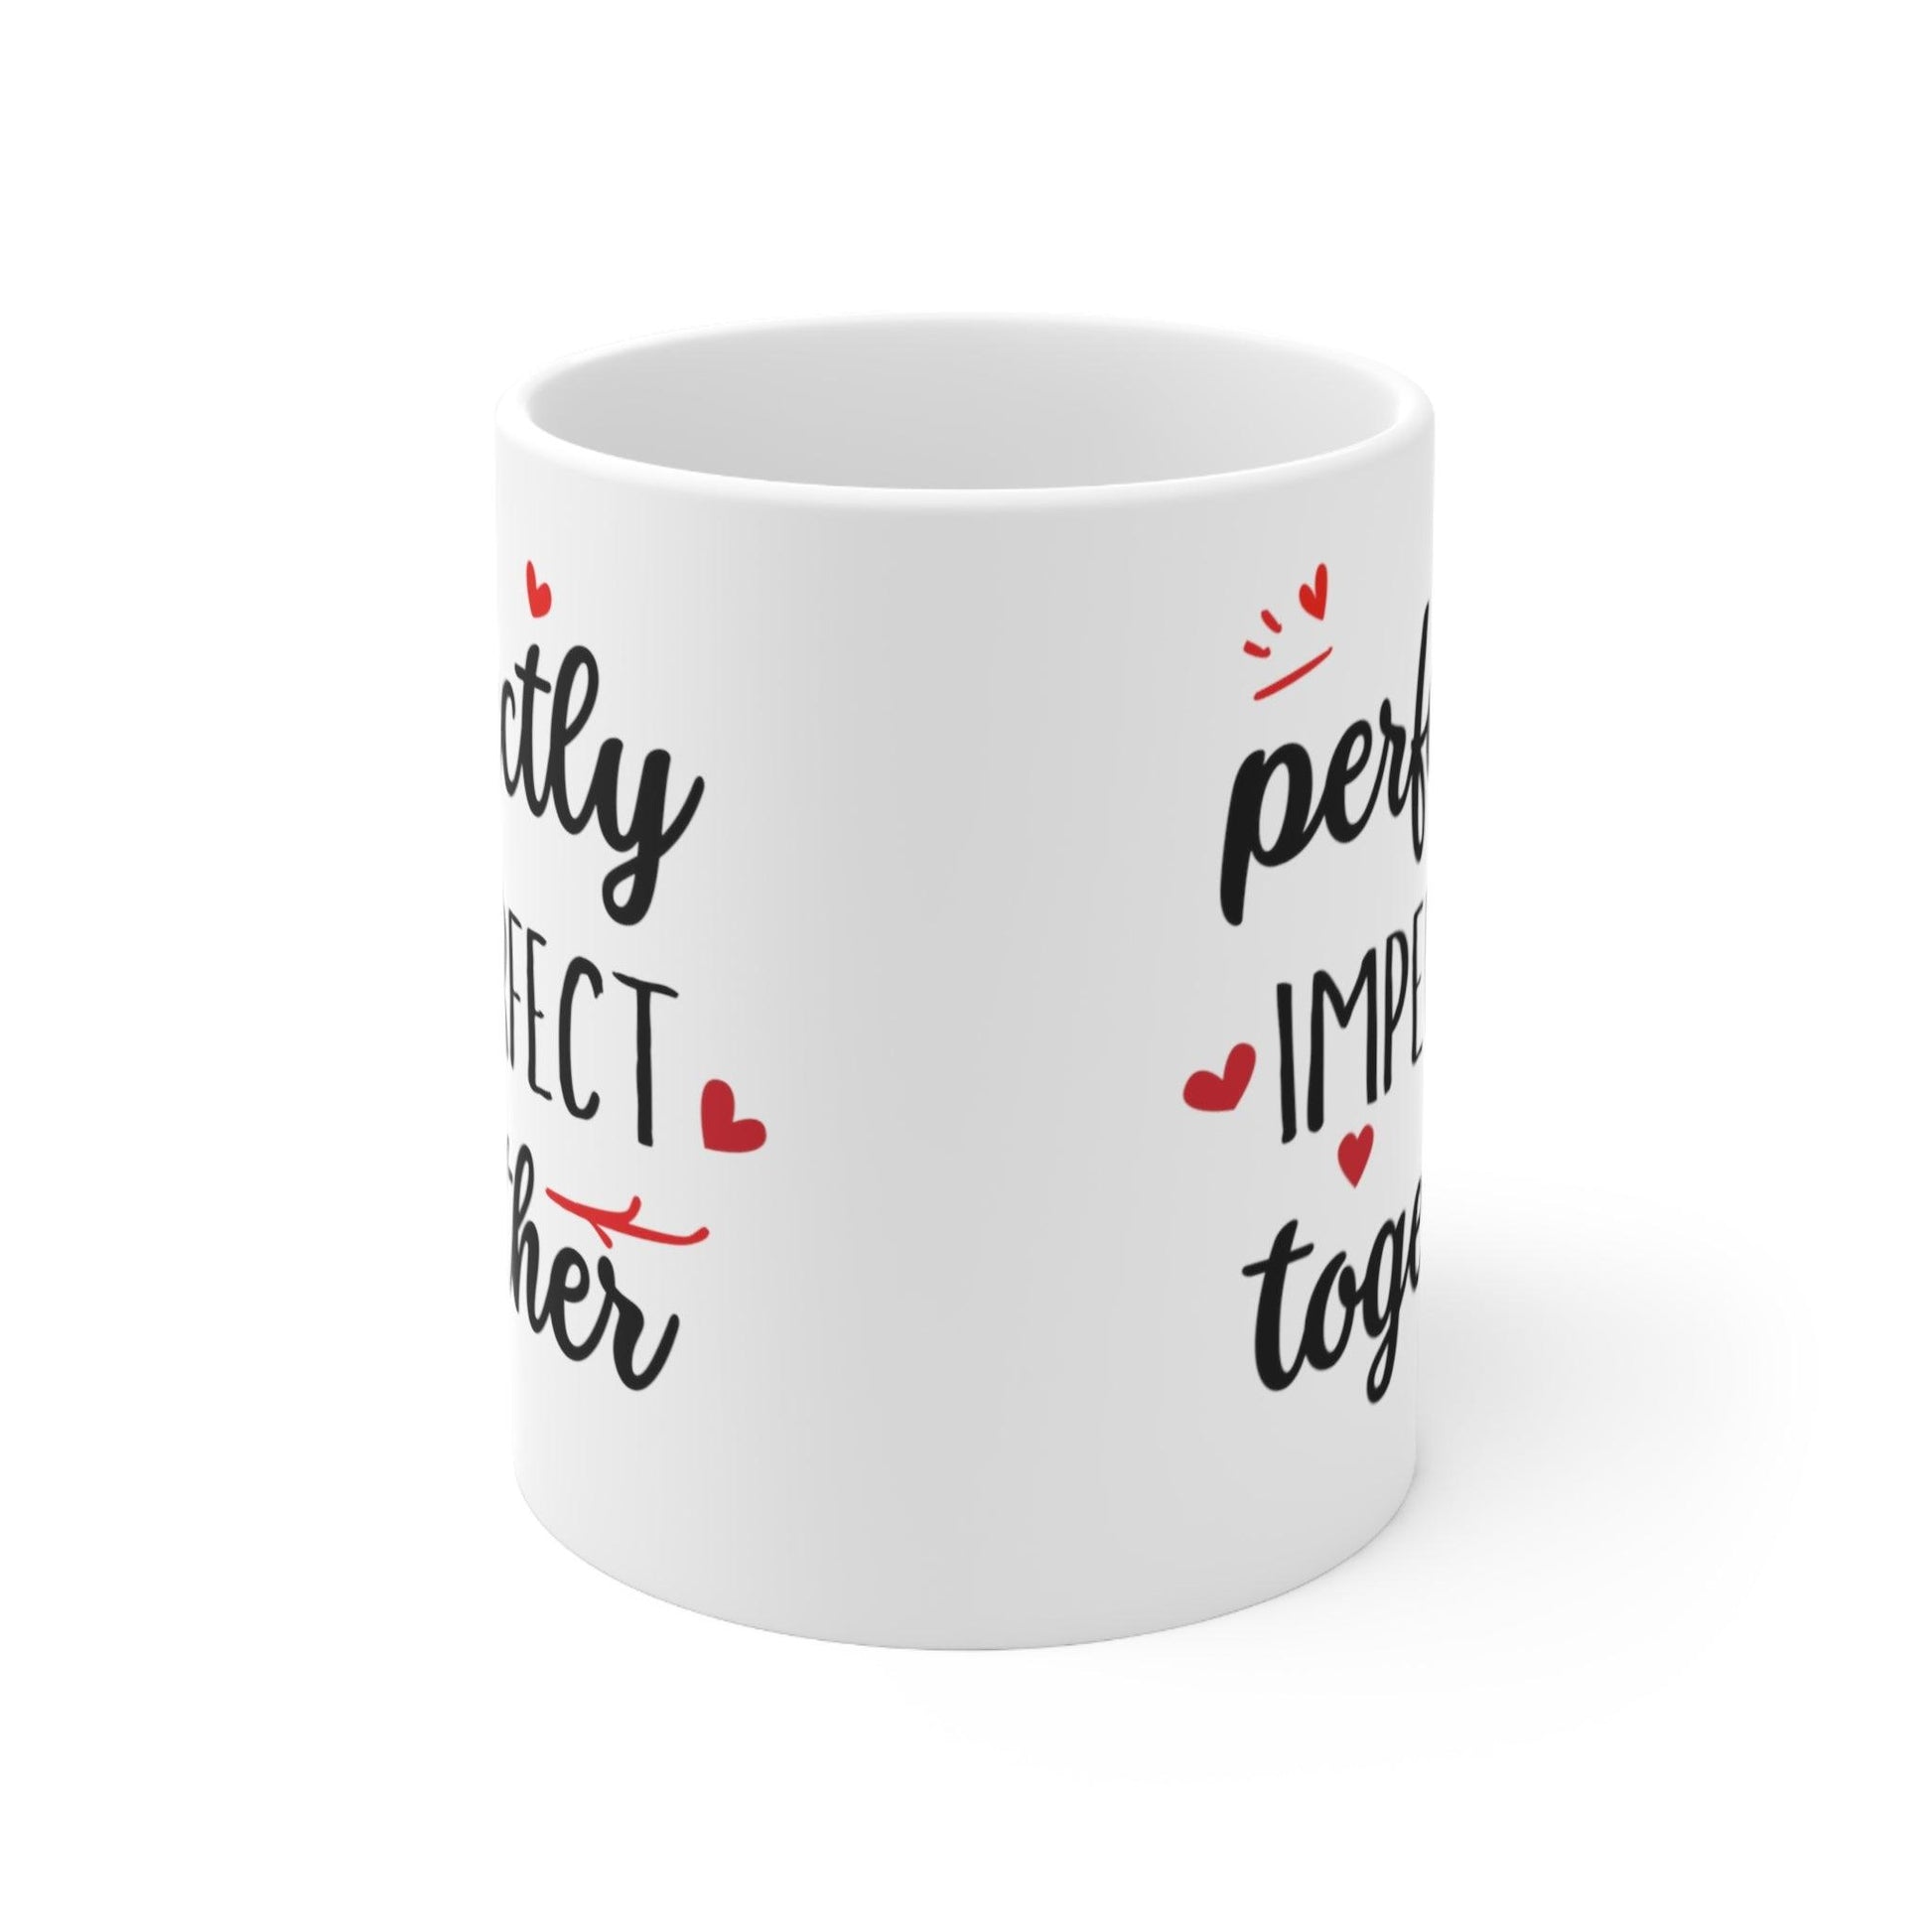 Neurodivergent Love Mug - 'Perfectly Imperfect Together' Valentine's Cup with Red Hearts - Fidget and Focus